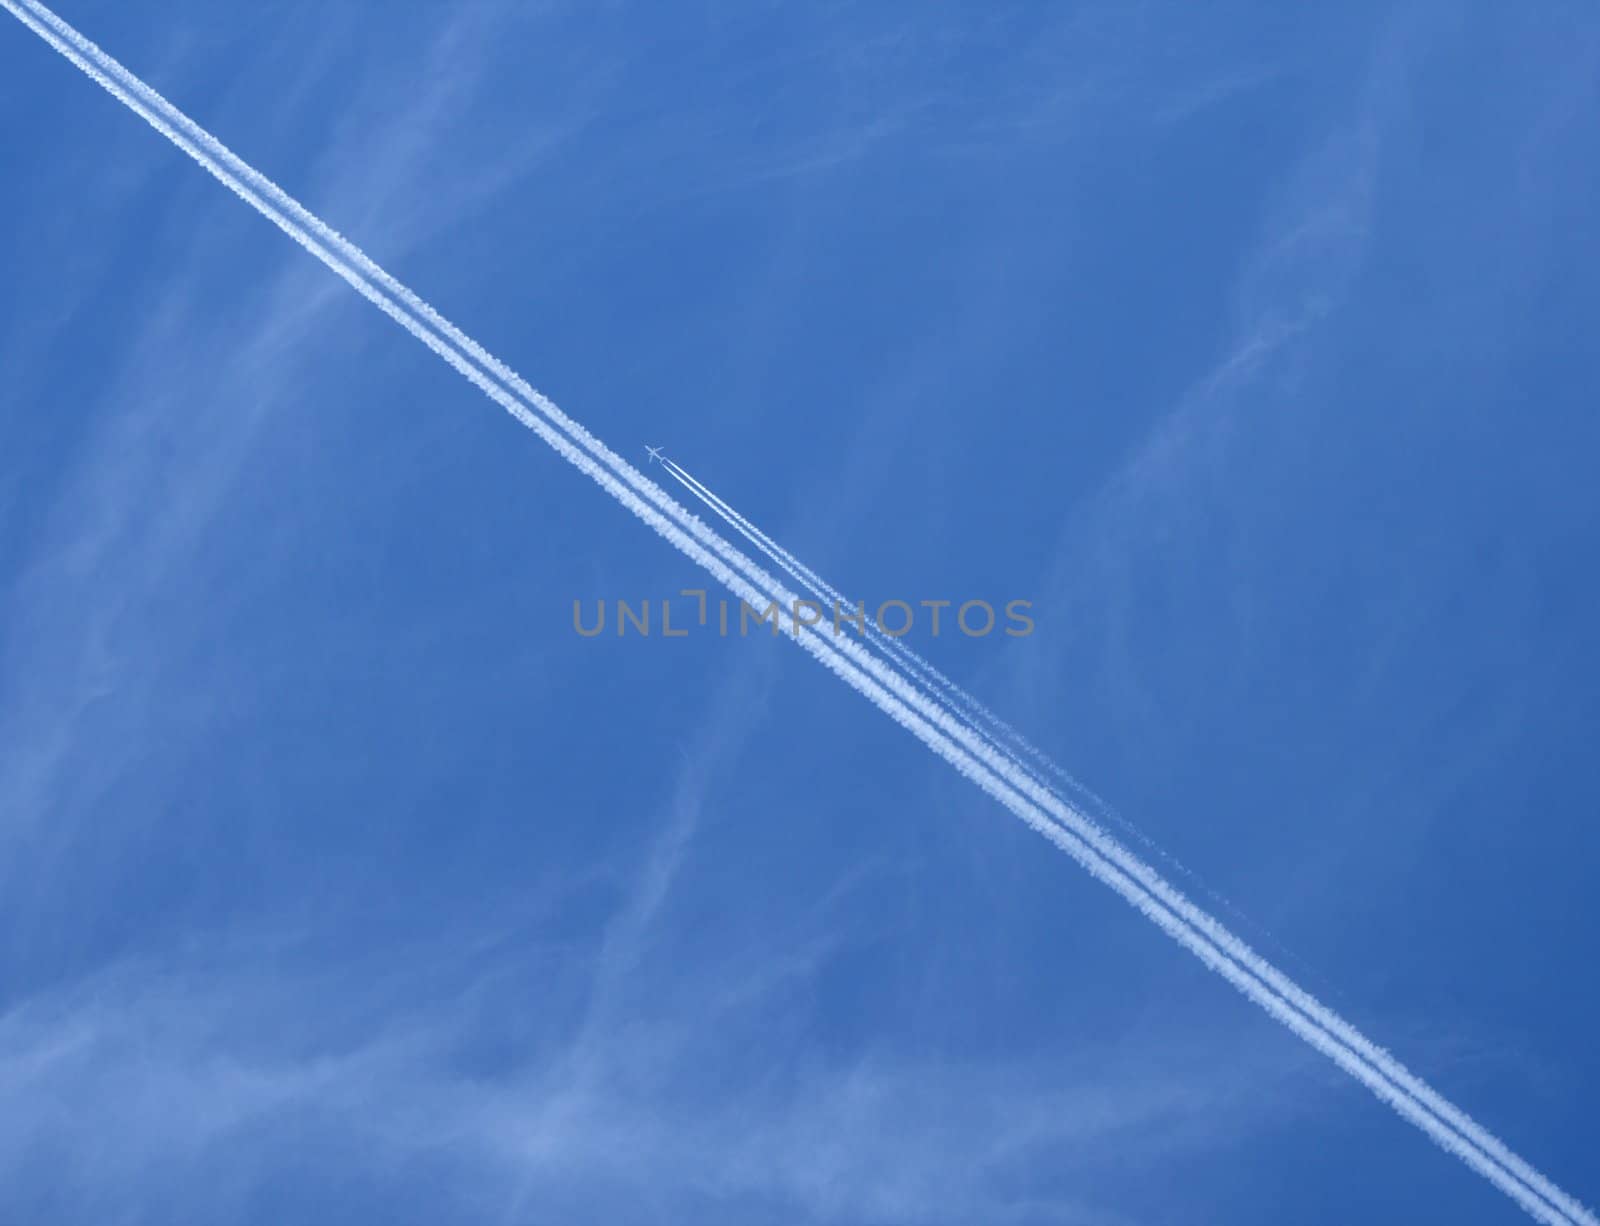 Jet airplanes in the blue sky by anikasalsera